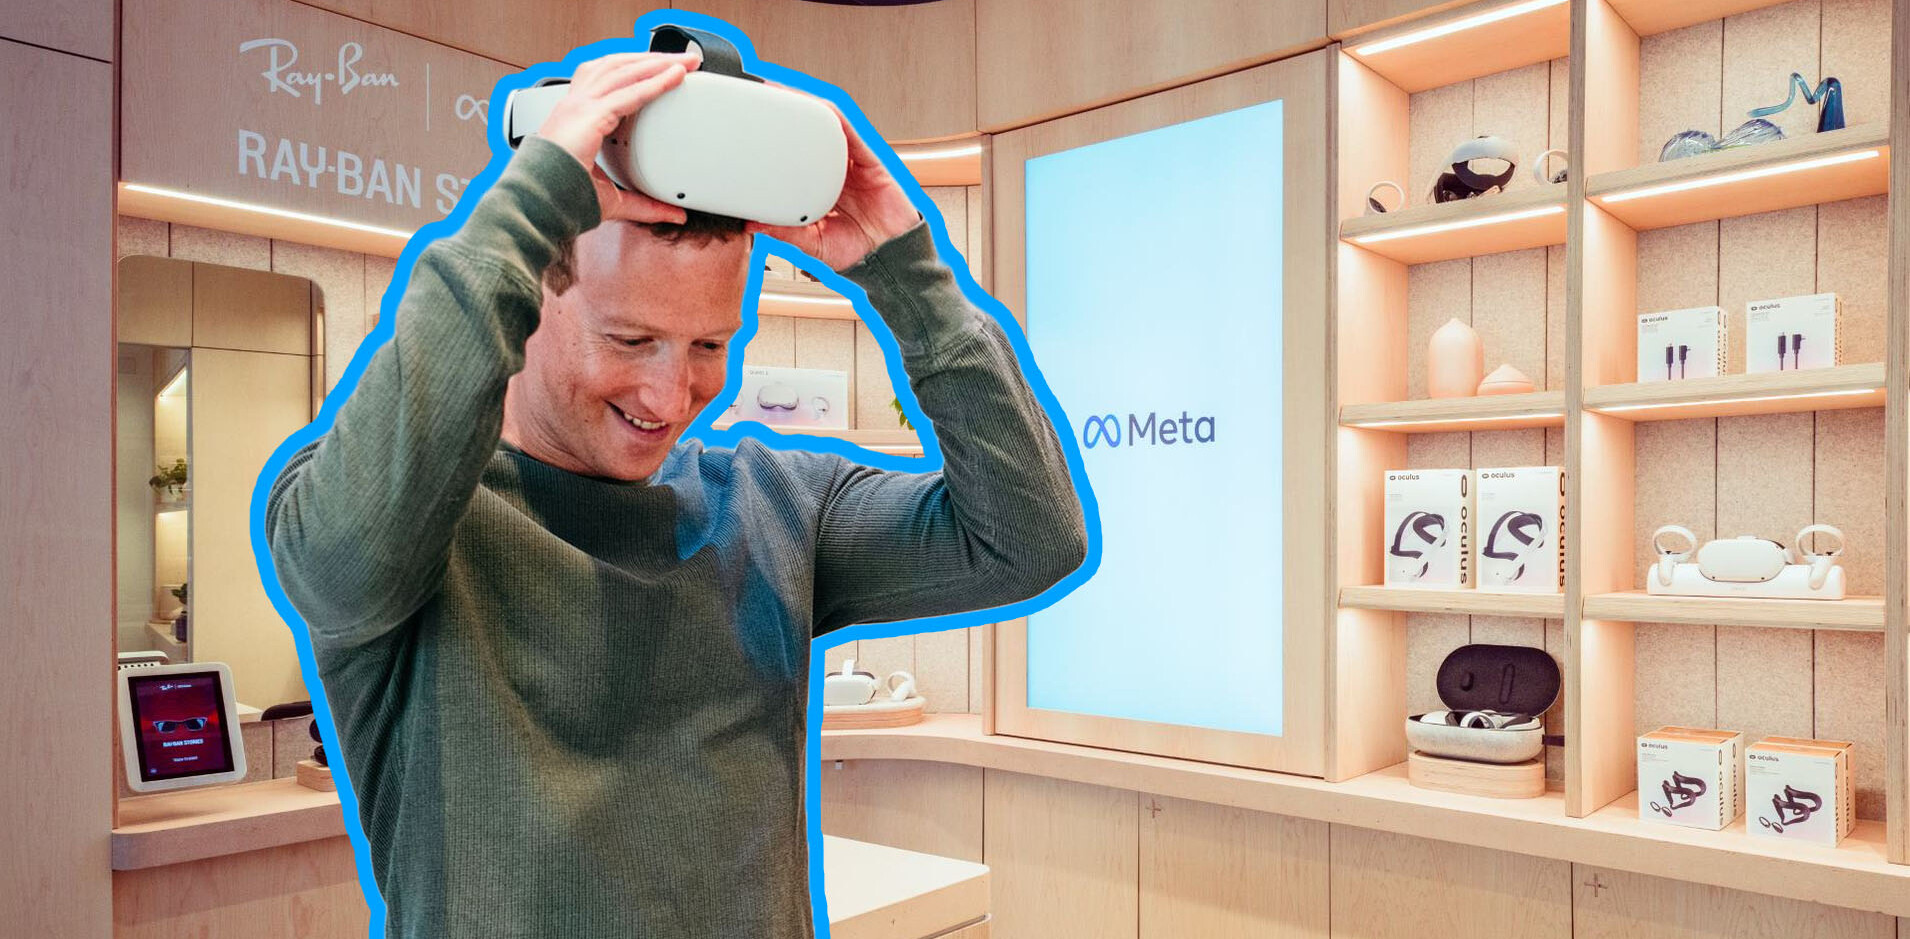 The Apple Store is so 2001 — here comes the Meta Store